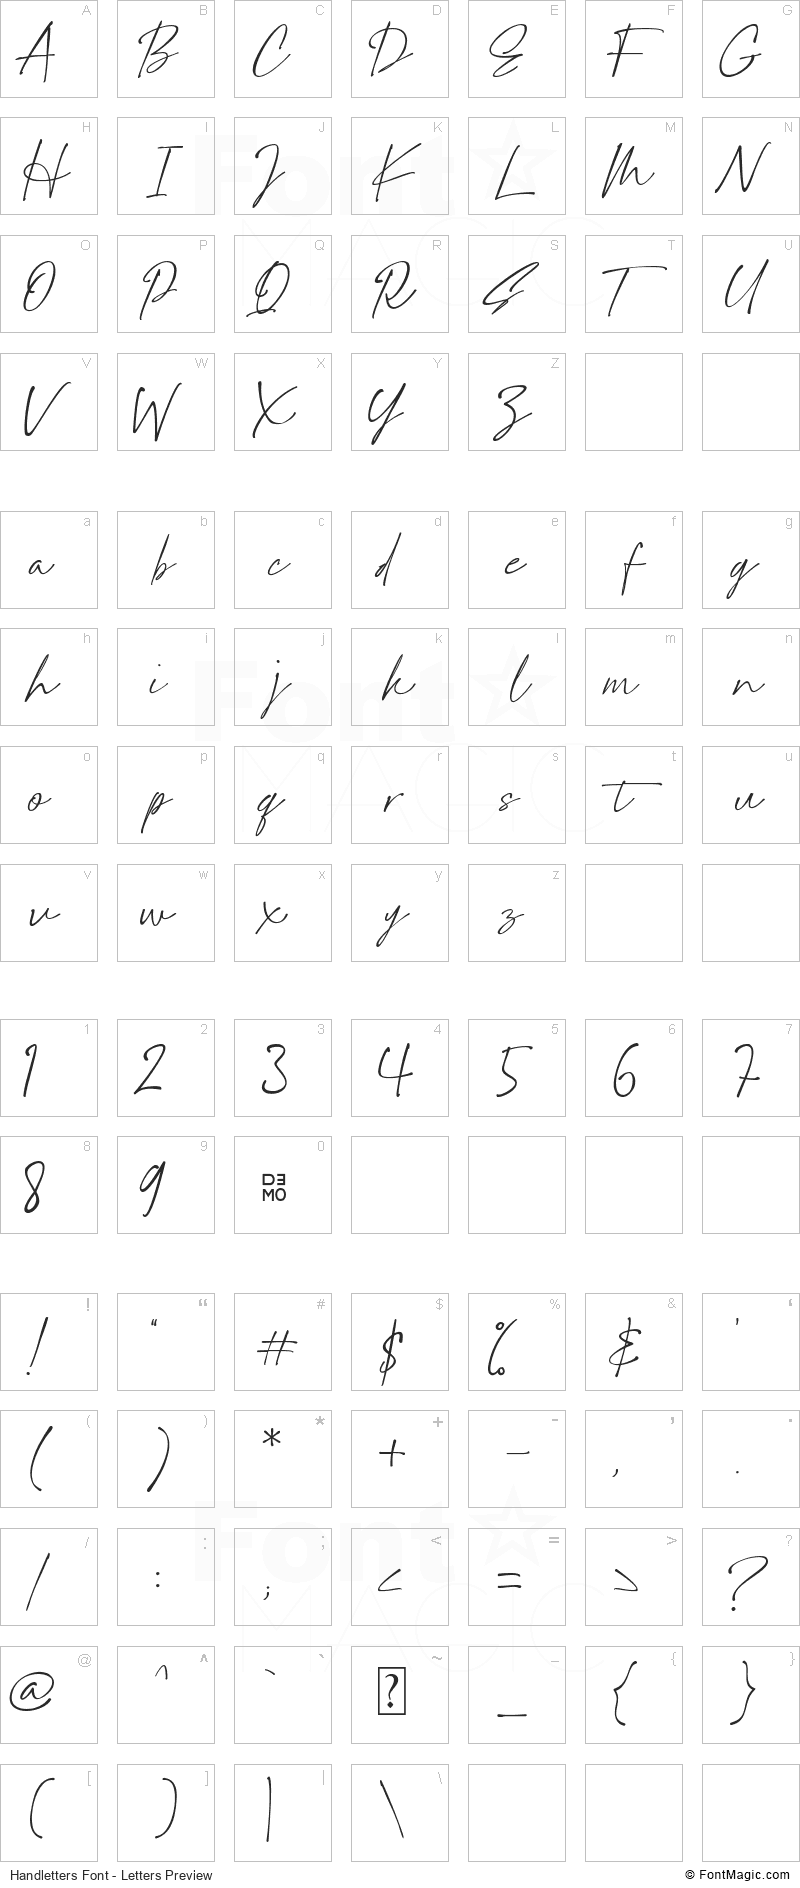 Handletters Font - All Latters Preview Chart